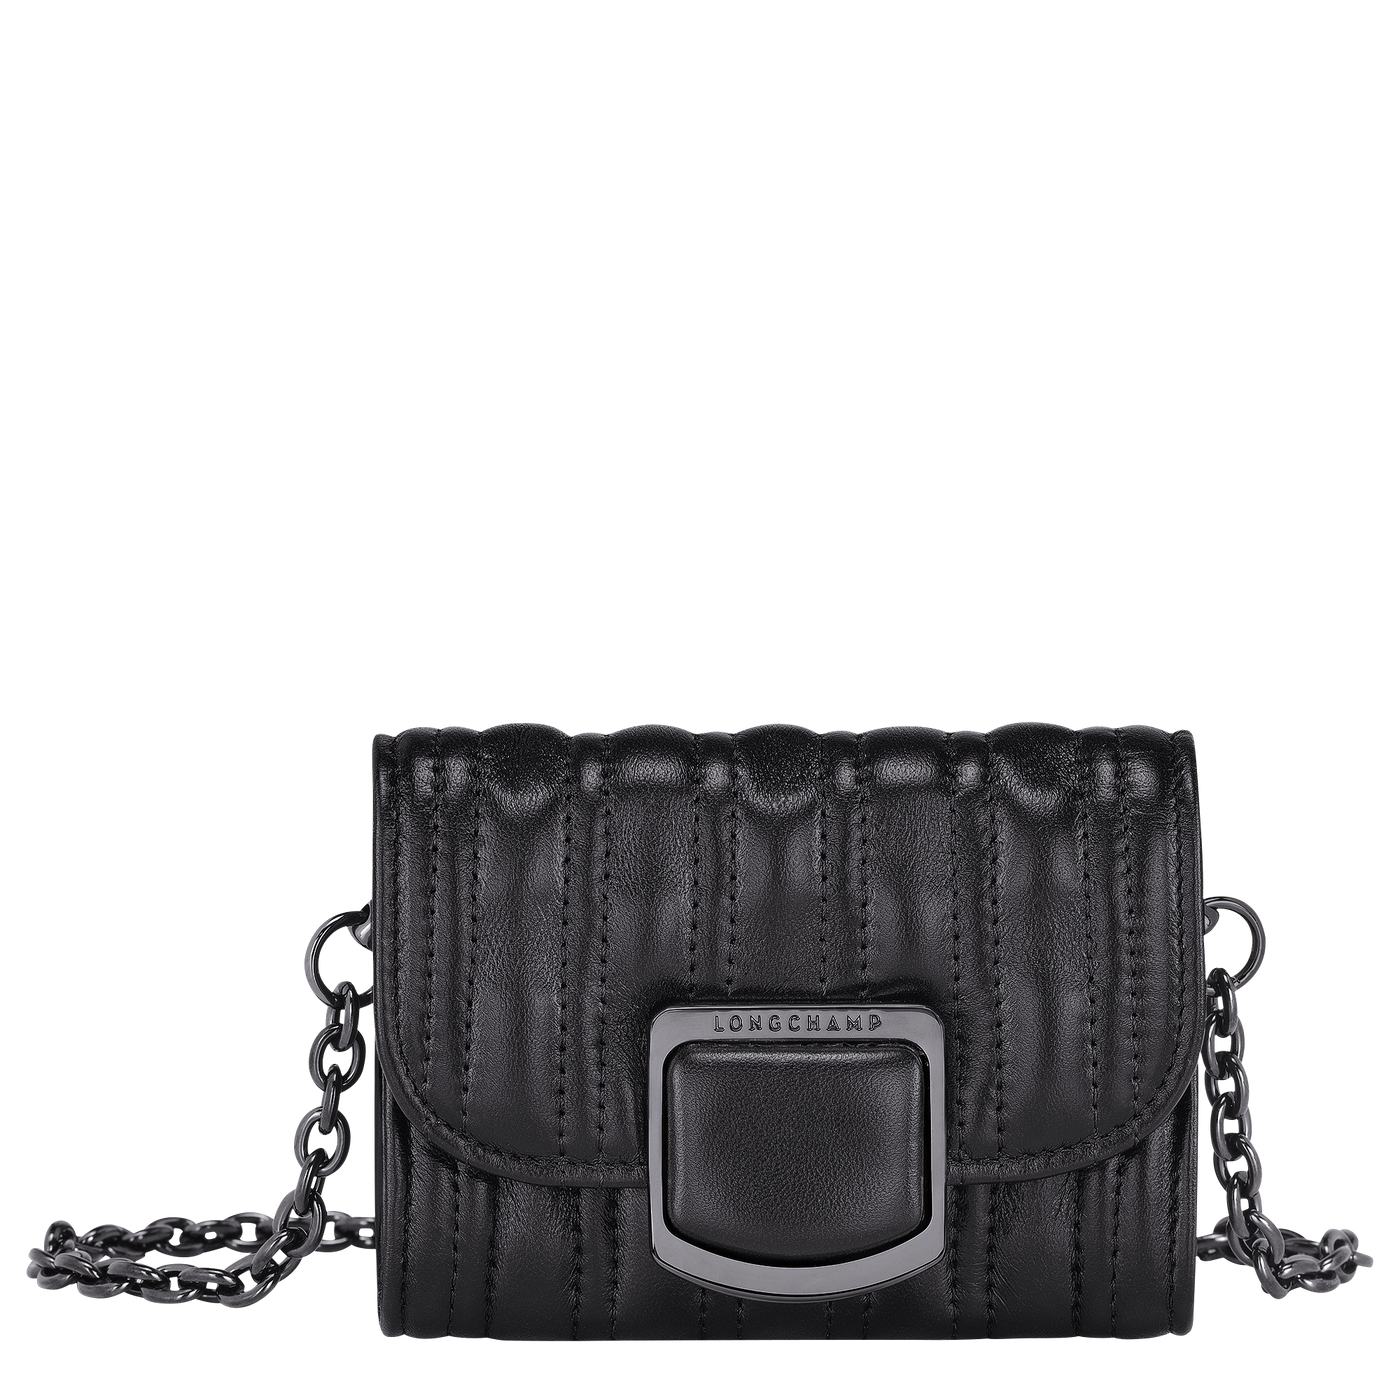 Shop The Latest Collection Of Longchamp Brioche Wallet On Chain - 30023Hvv In Lebanon